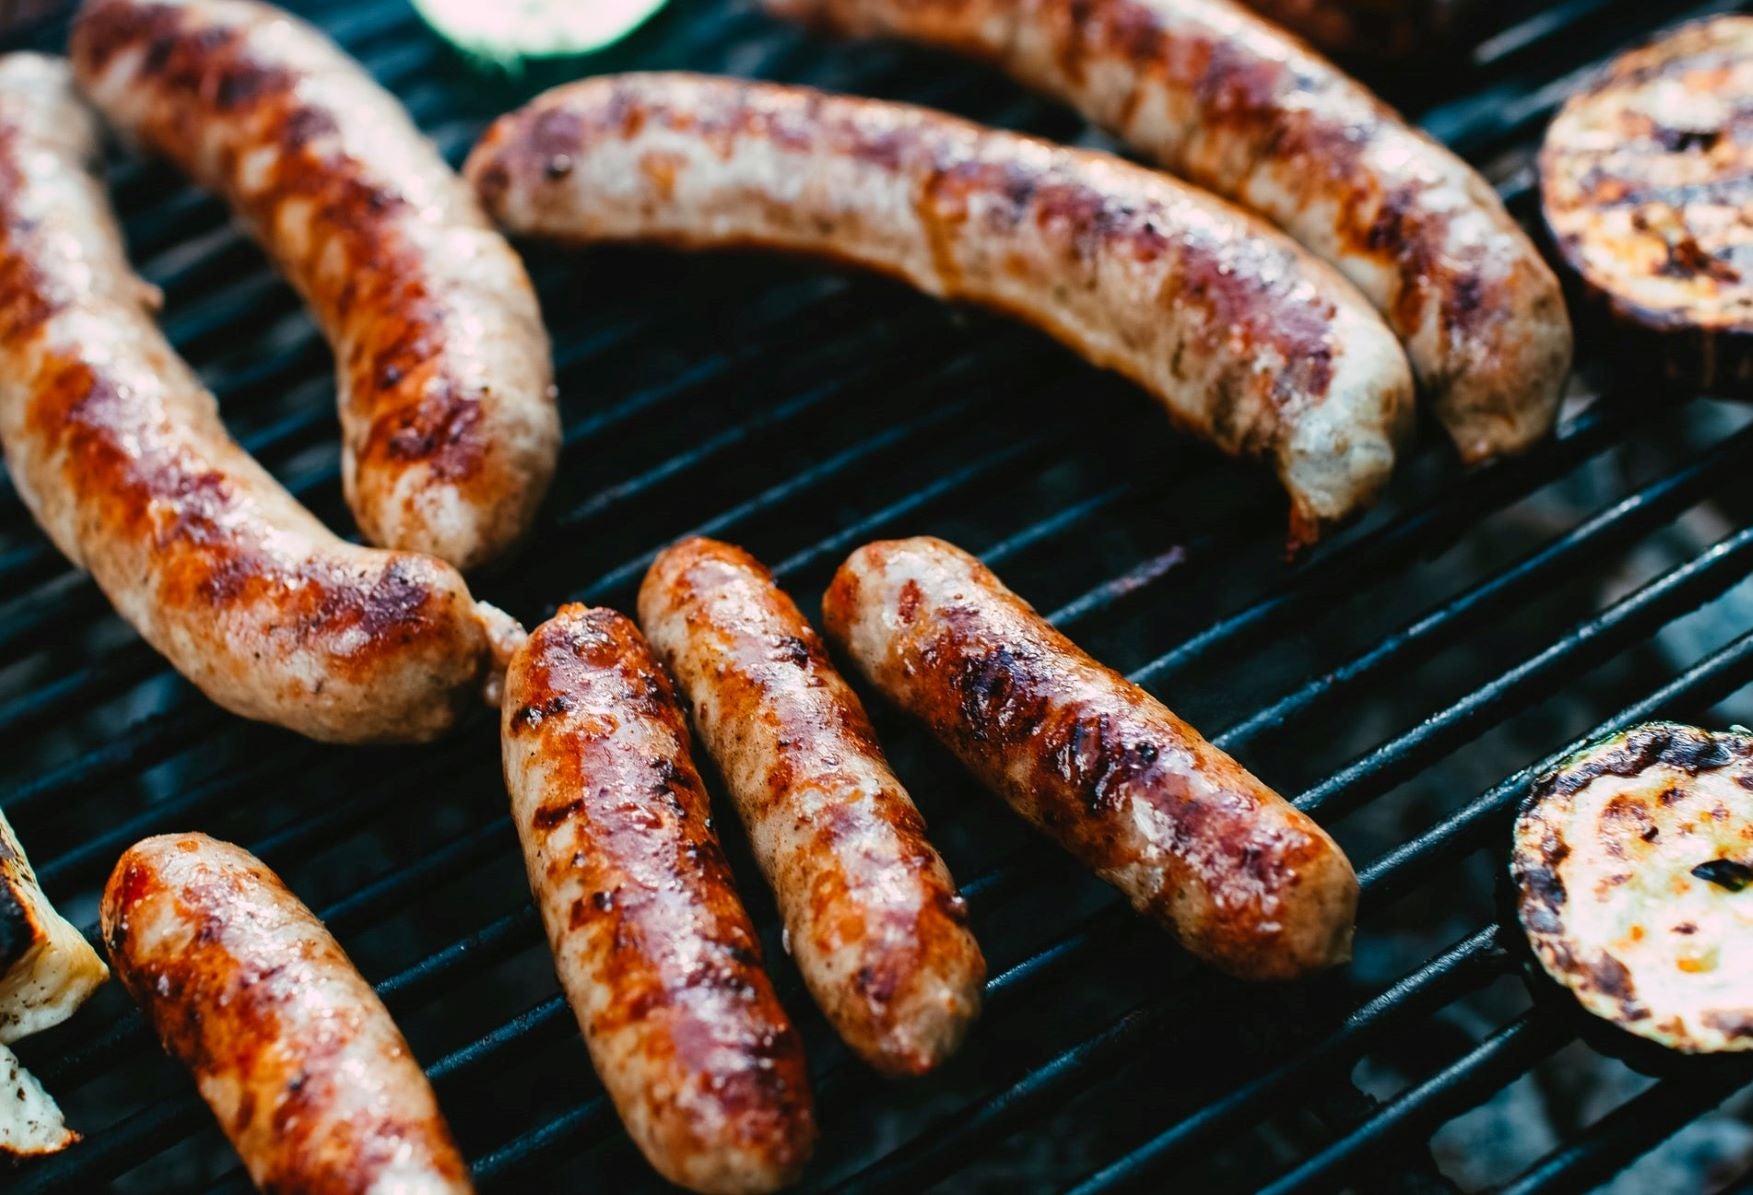 learn how to make venison sausage